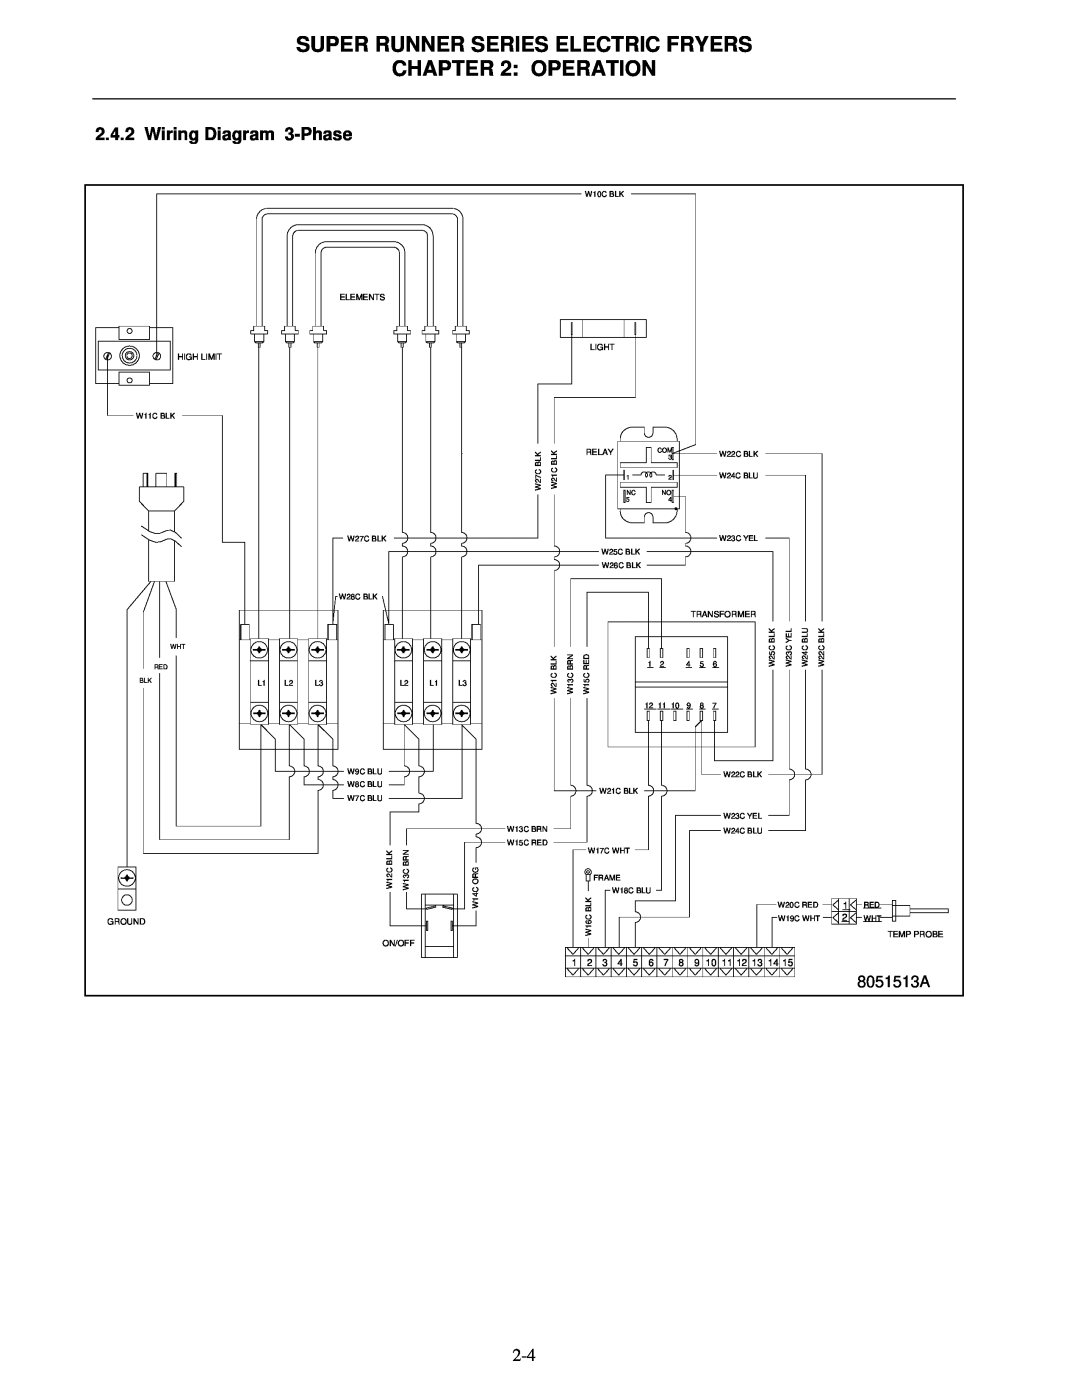 Frymaster SR114E Super Runner Series Electric Fryers Operation, Wiring Diagram 3-Phase, 8051513A, 10 11 12 13 